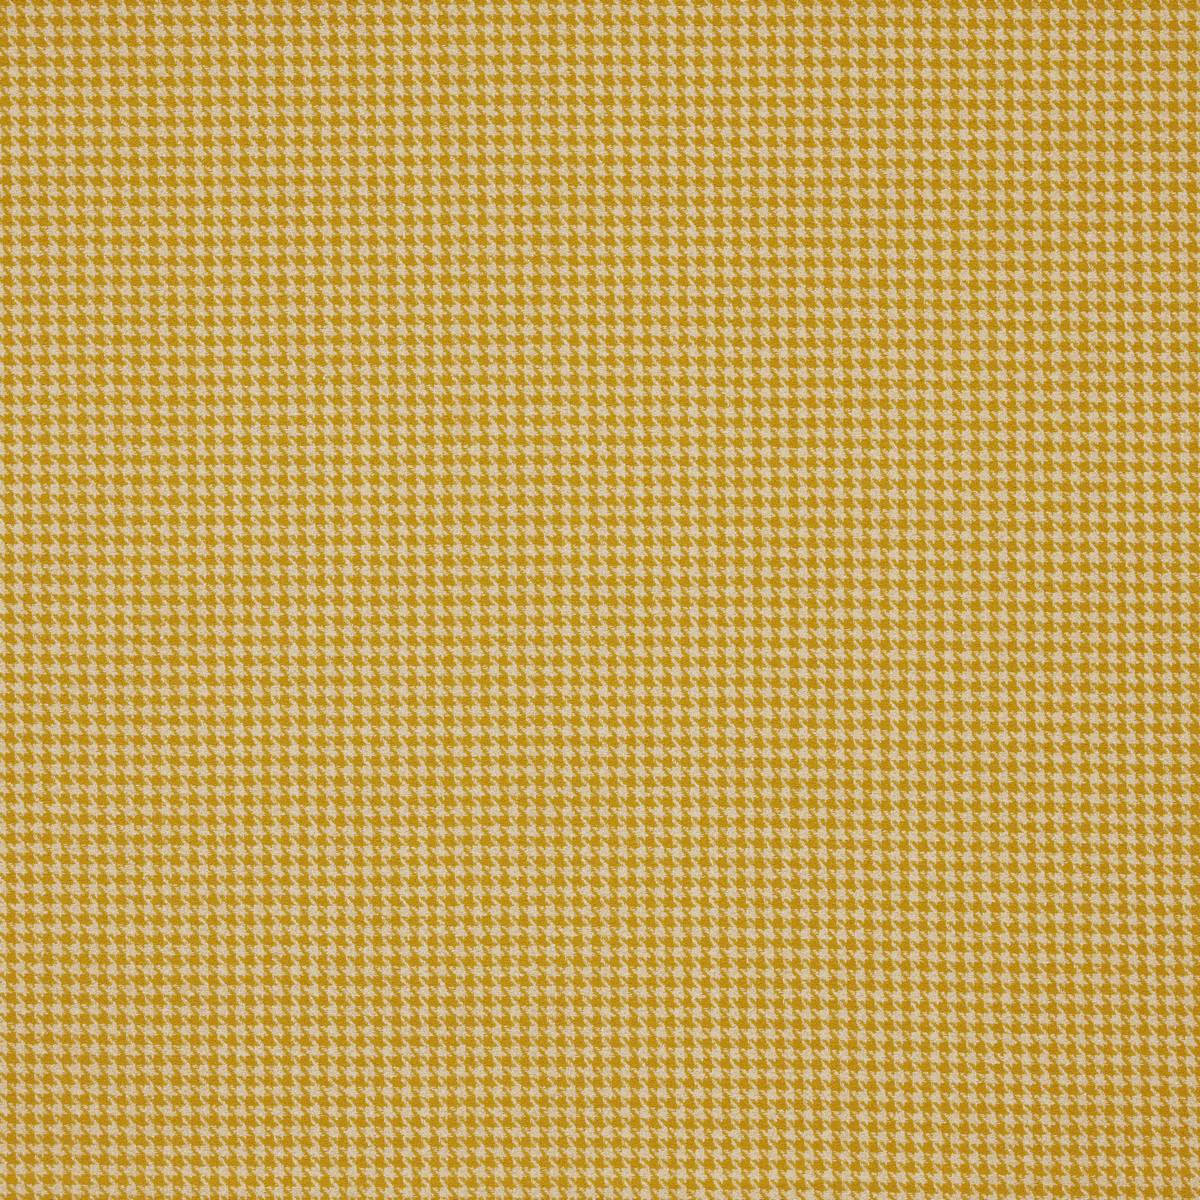 Houndstooth Ochre Fabric by iLiv